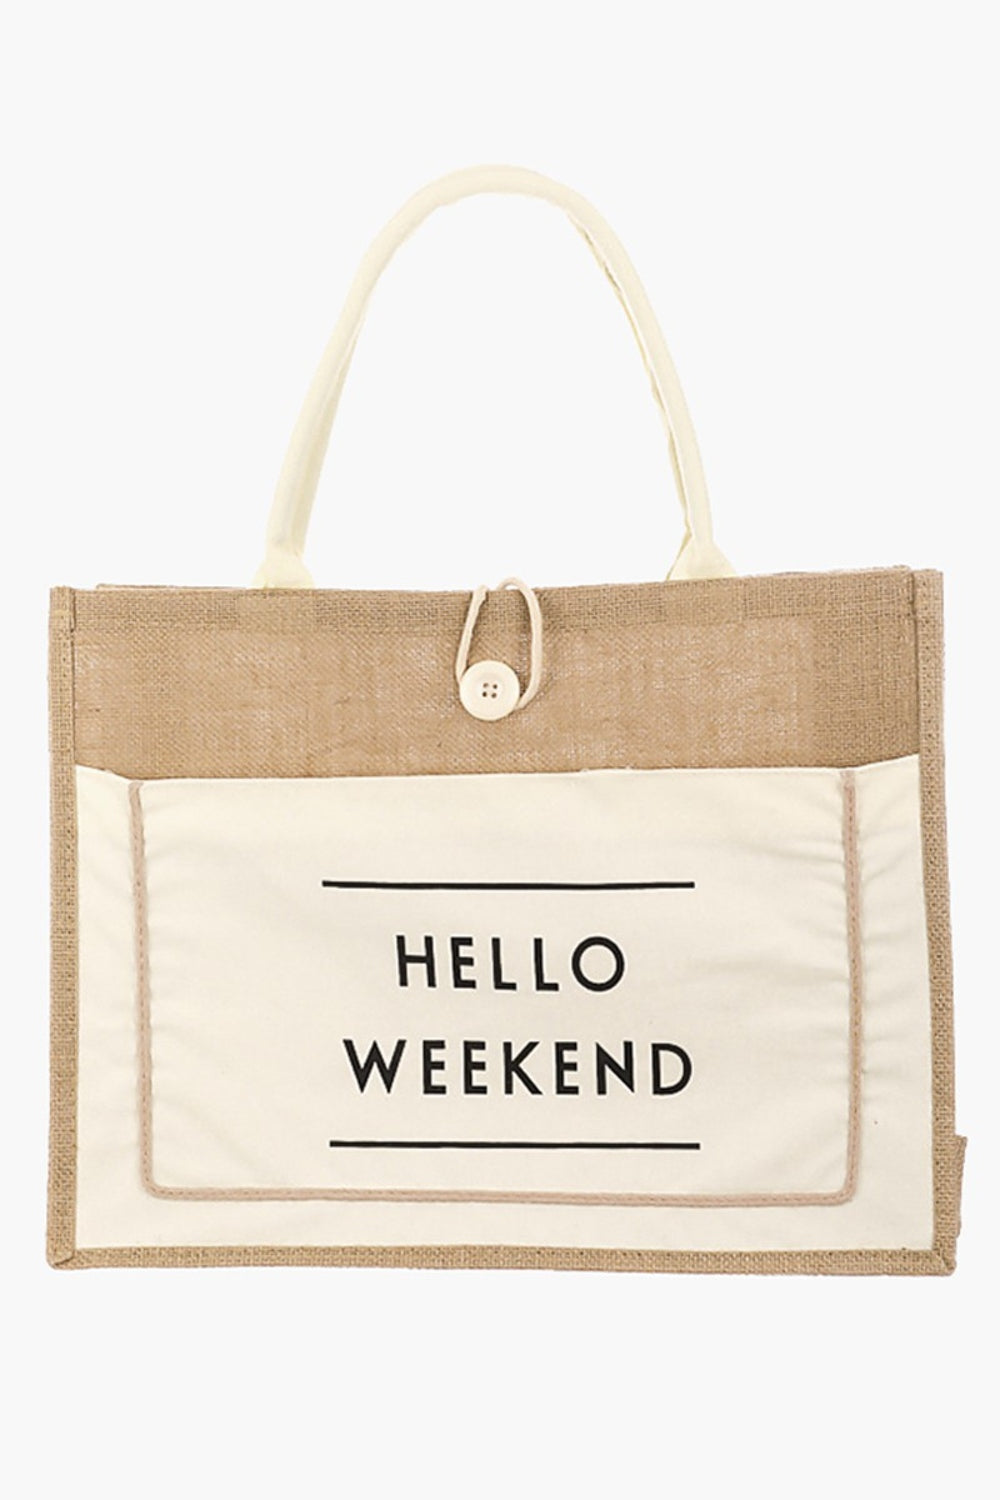 Fame Hello Weekend Burlap Tote Bag Ivory One Size Bags JT's Designer Fashion